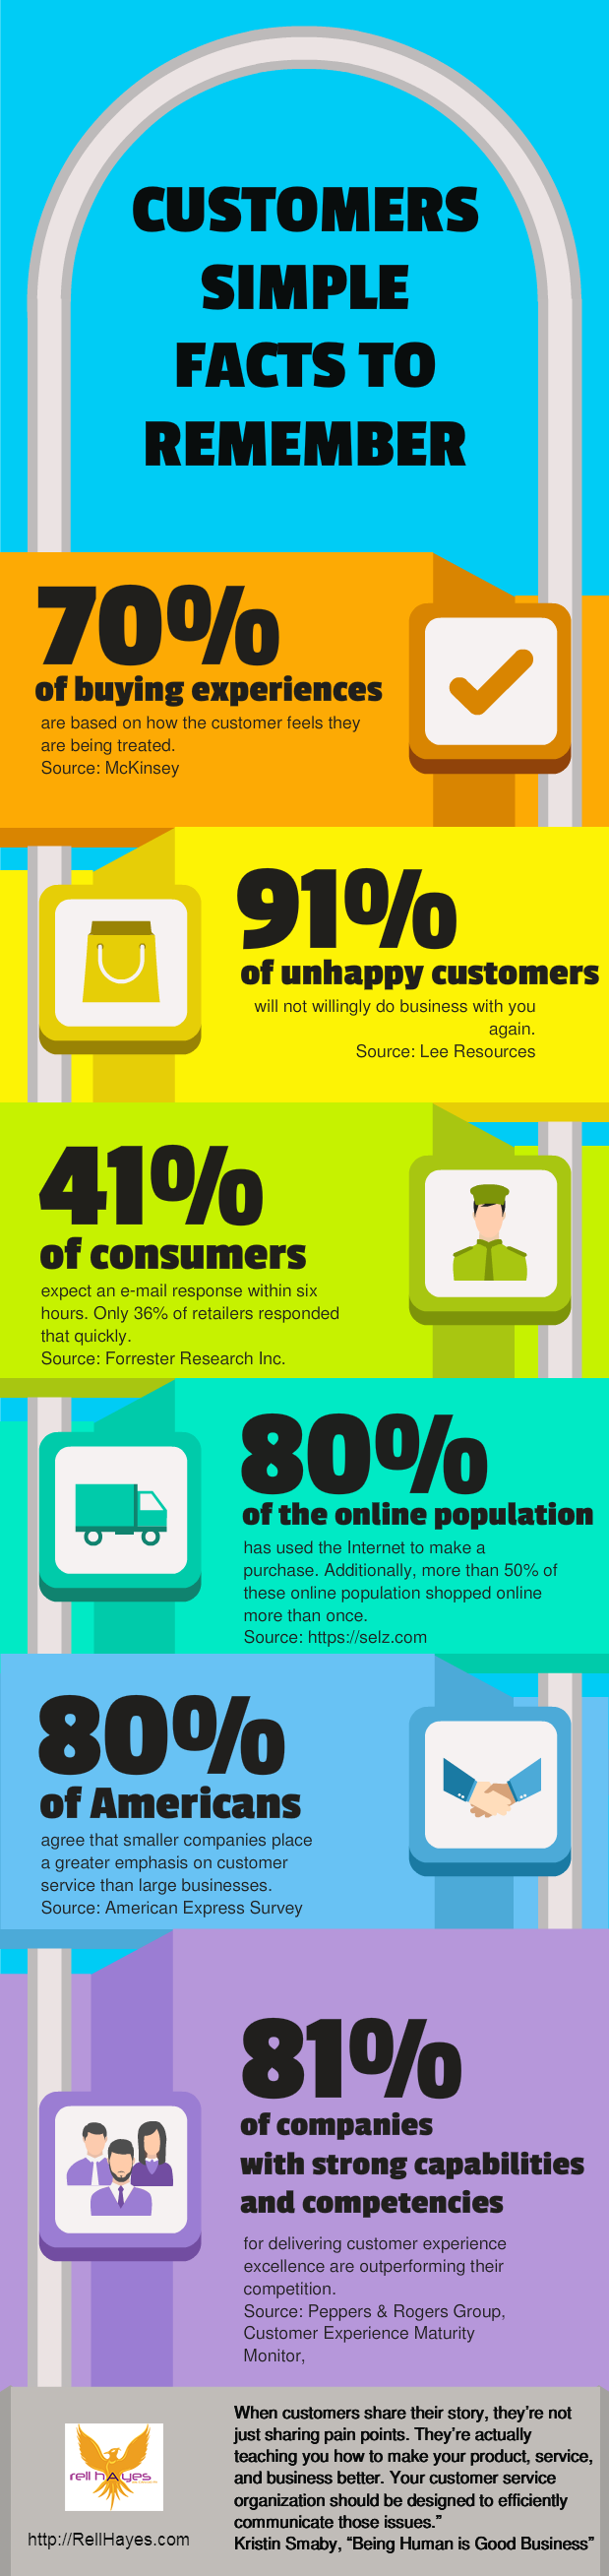 Customers Facts Infographic